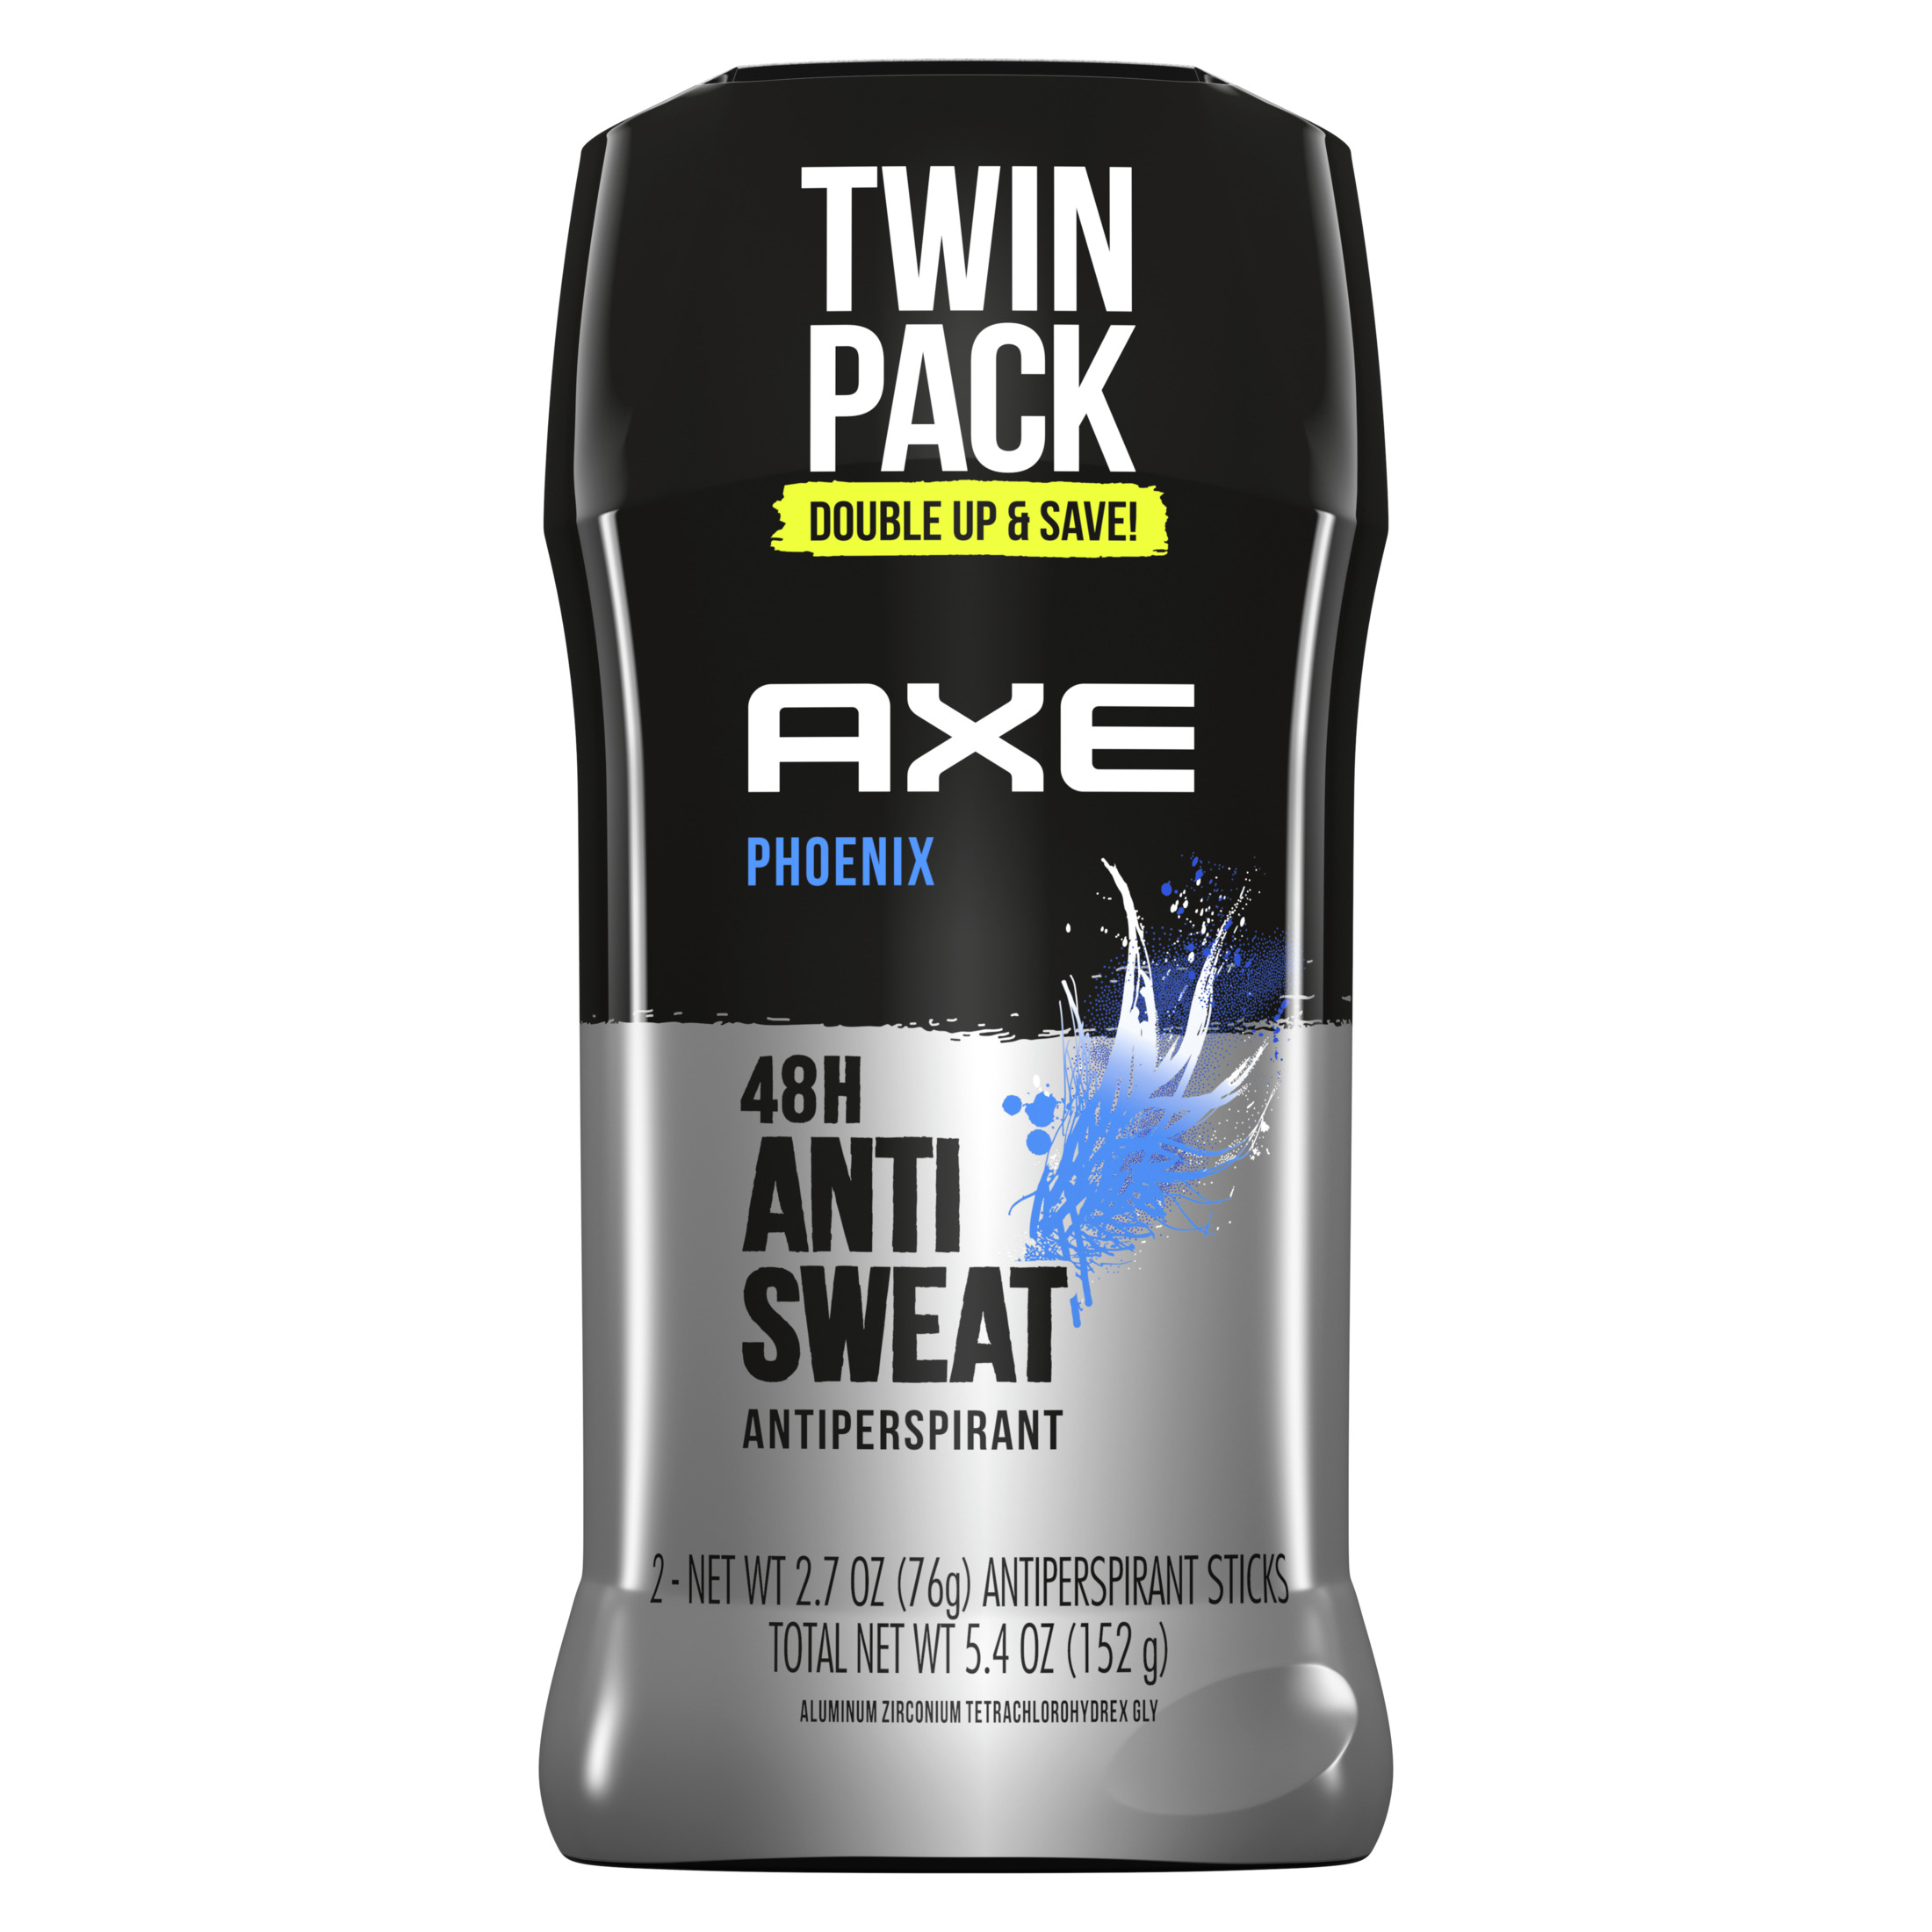 Axe Phoenix Long Lasting Antiperspirant Deodorant Stick Twin Pack, Crushed Mint and Rosemary, 2.7 oz - image 1 of 10